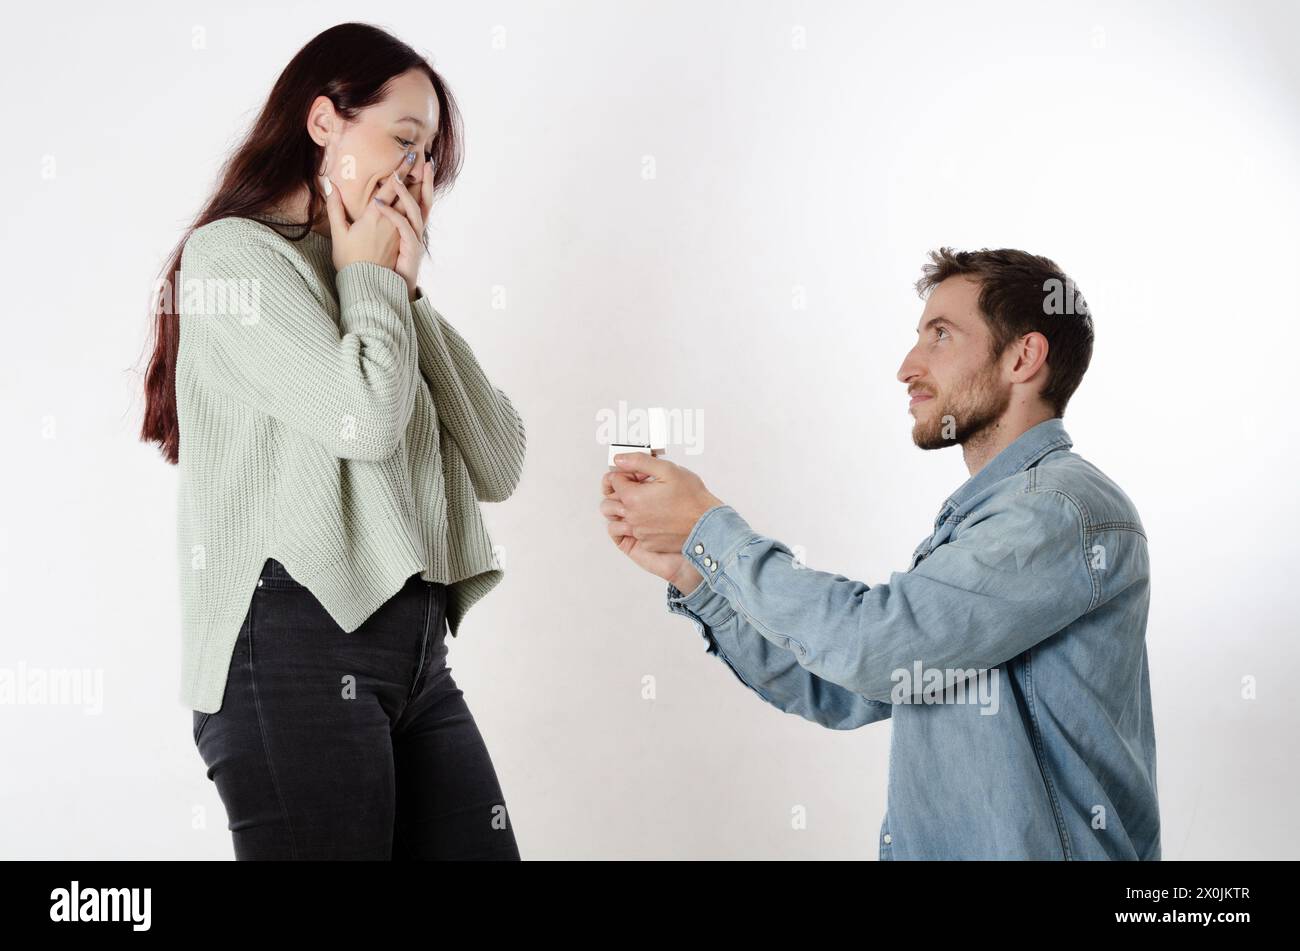 Man on his knees proposing marriage to his girlfriend with a ring box in his hands Stock Photo